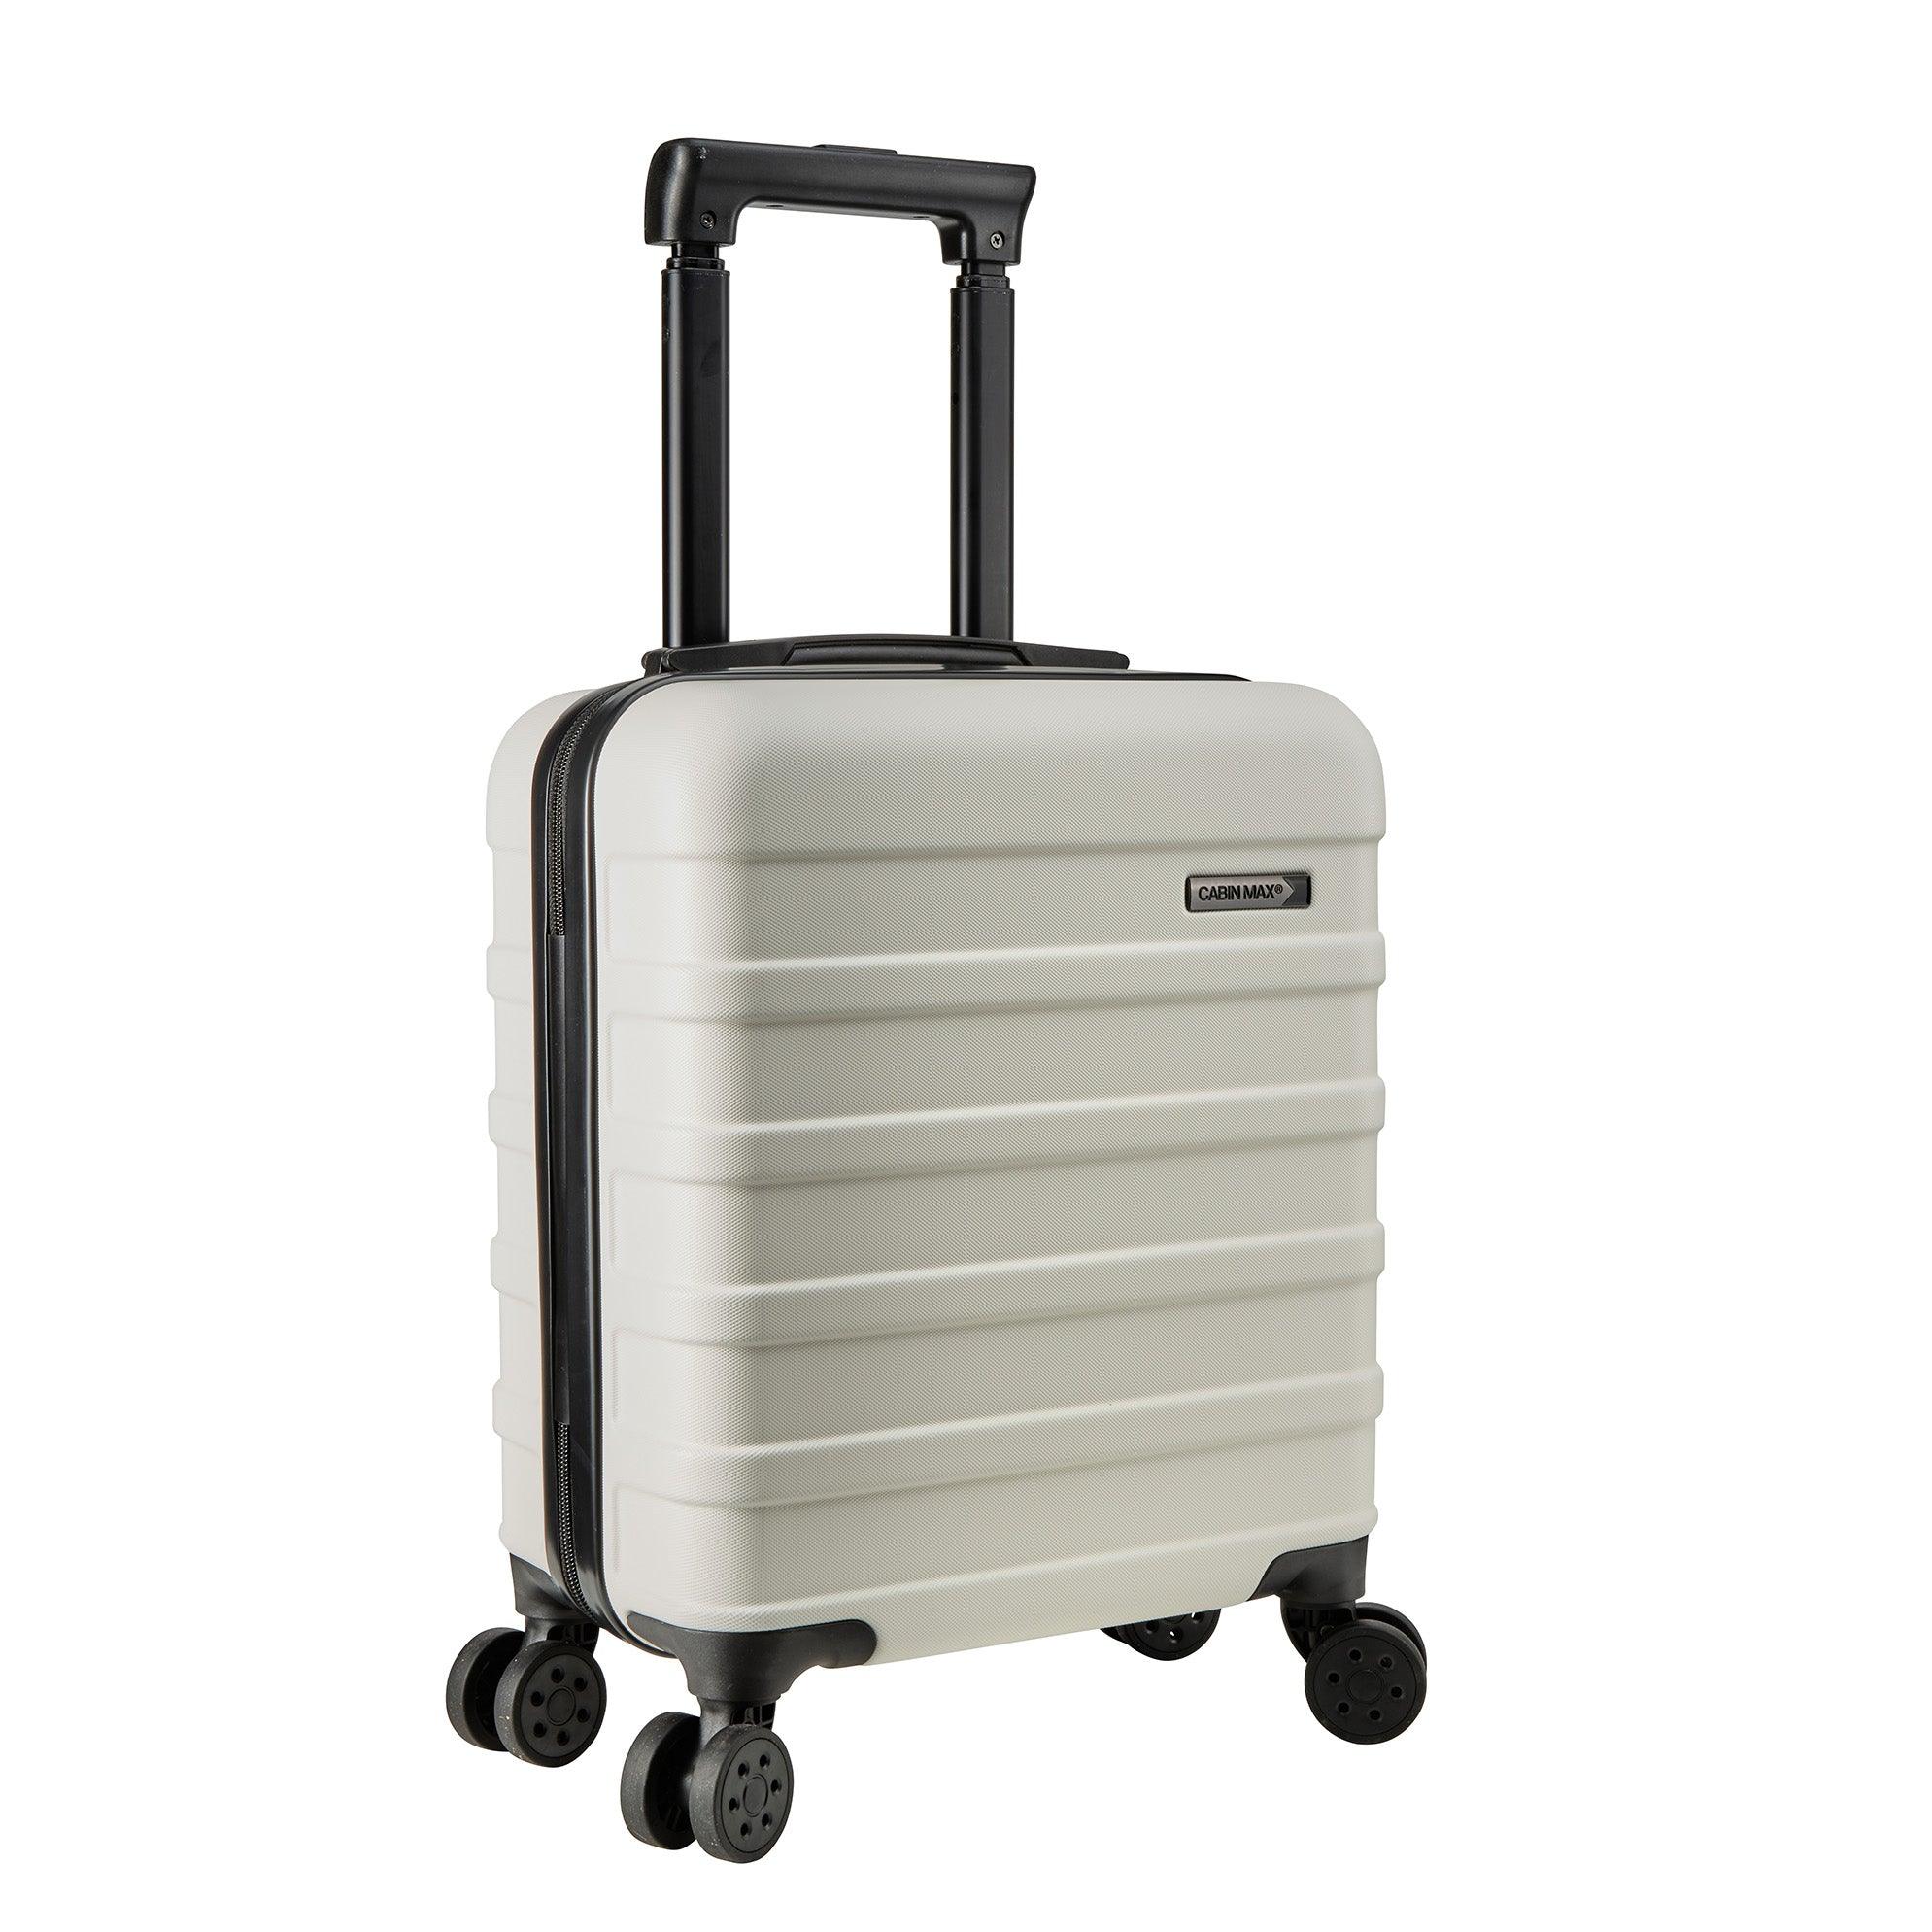 Buy Cabin Max Anode Cabin Underseat & Carry On Suitcase - Easyjet Taille 45  x 36 x 20cm sur Next Canada